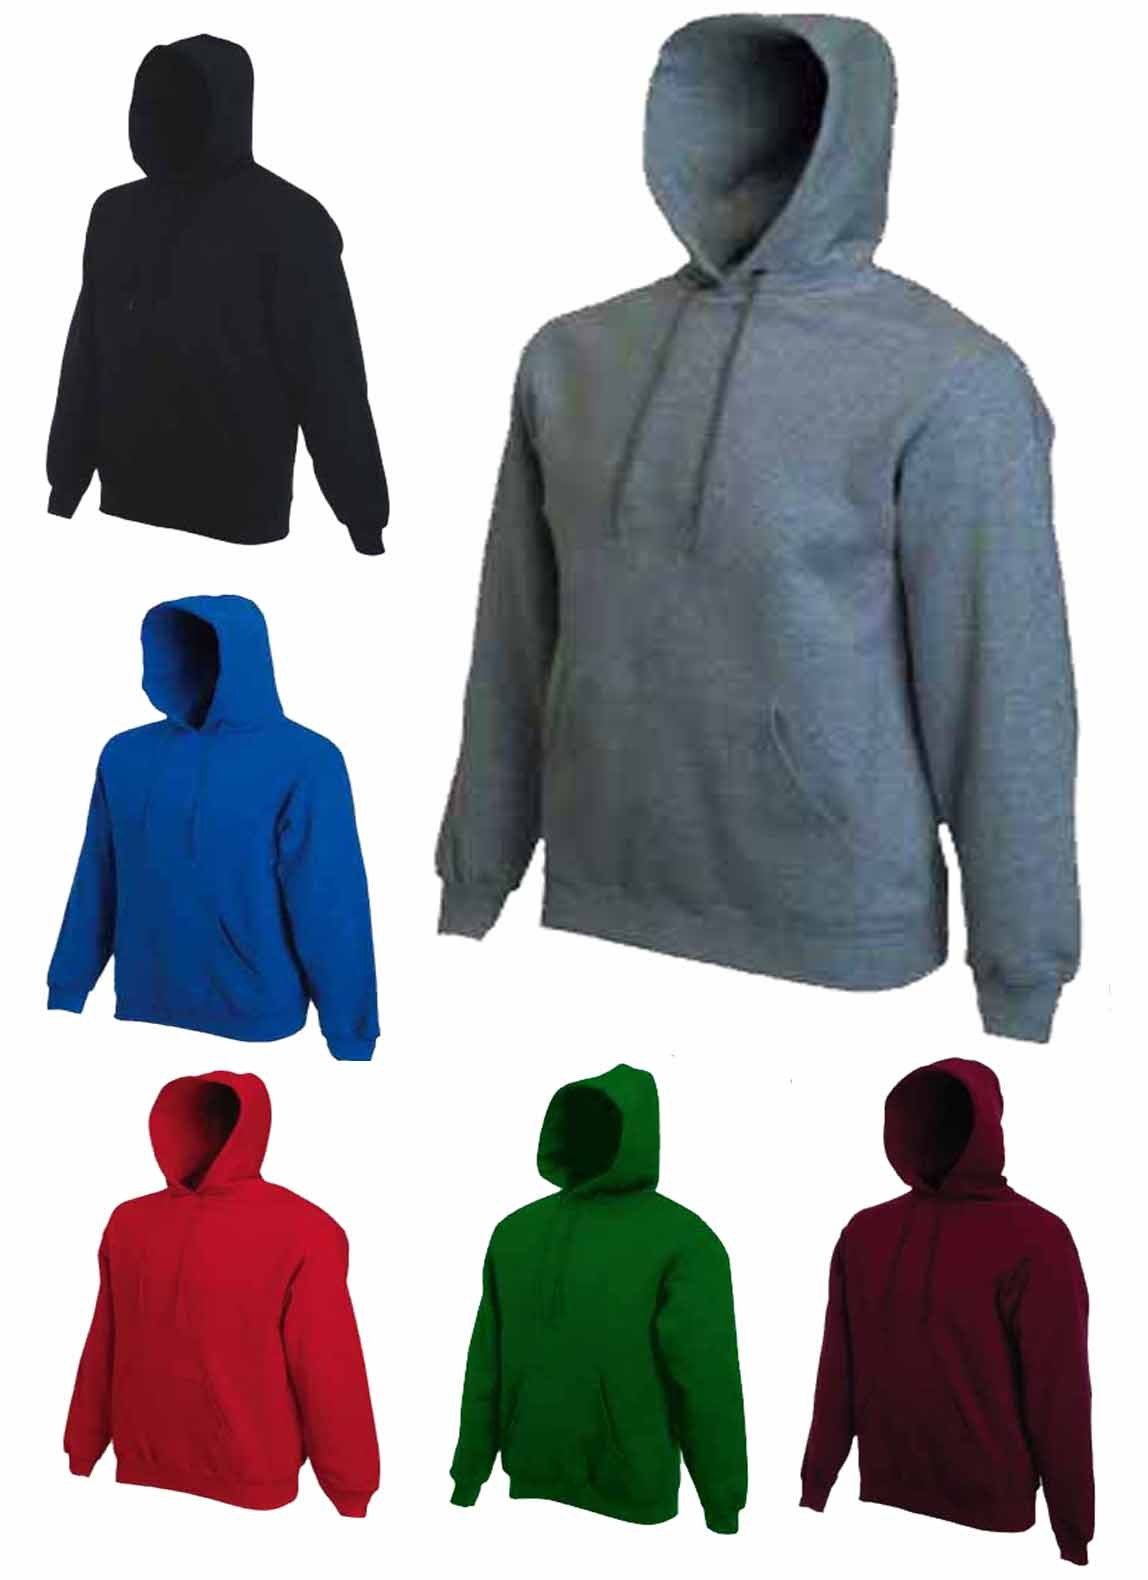 Mens Hooded Sweatshirts Size XS to 4XL HOODIE WORK CASUAL SPORTS LEISURE / 502